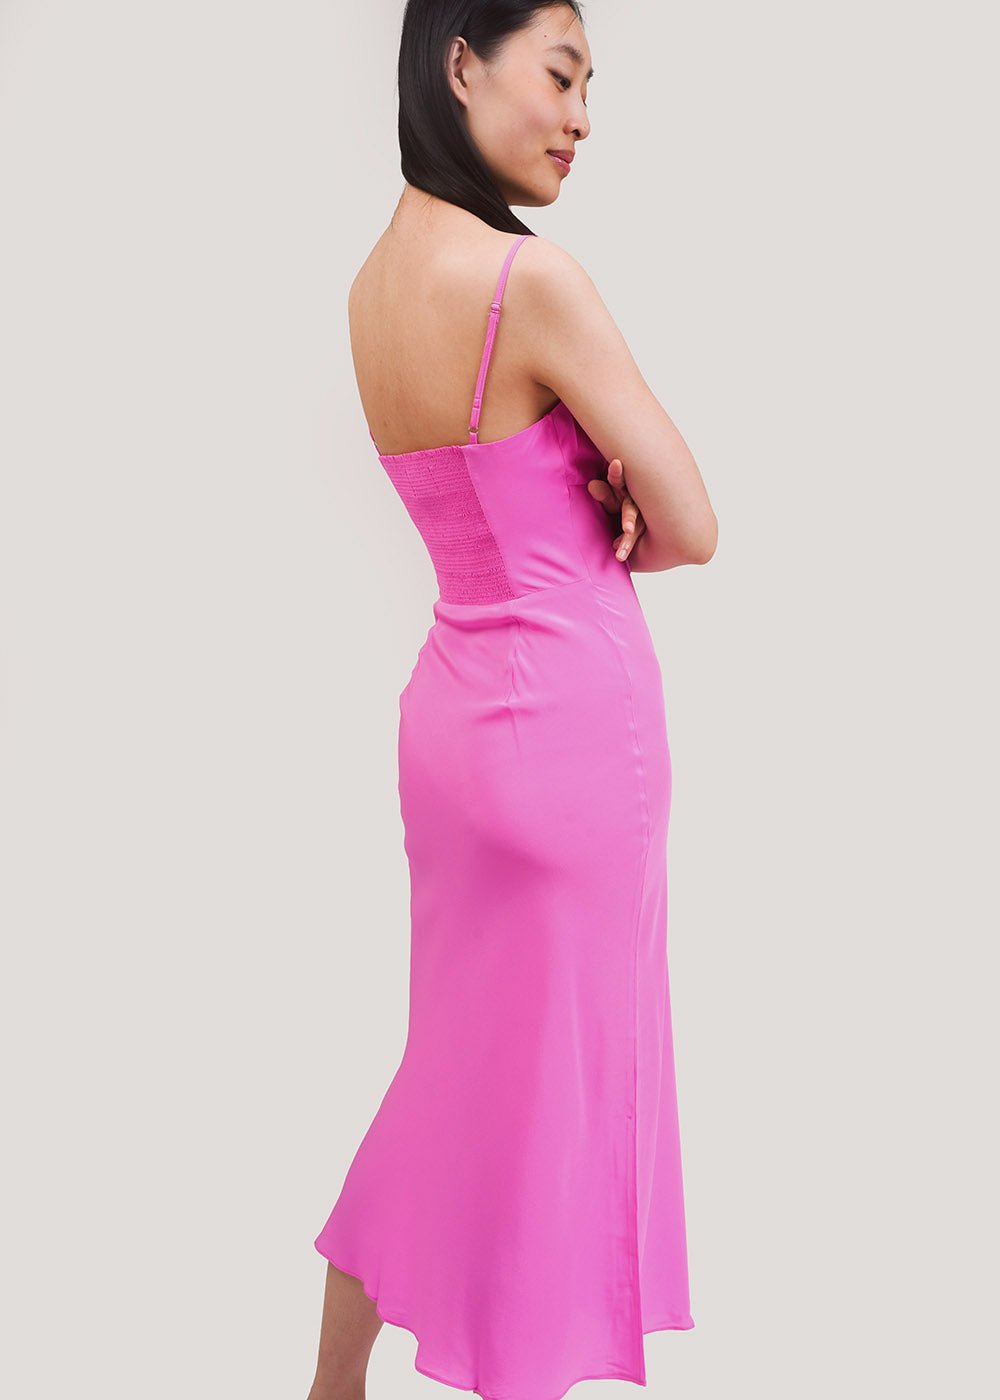 WRAY Barbera Pink Claudia Dress - New Classics Studios Sustainable Ethical Fashion Canada